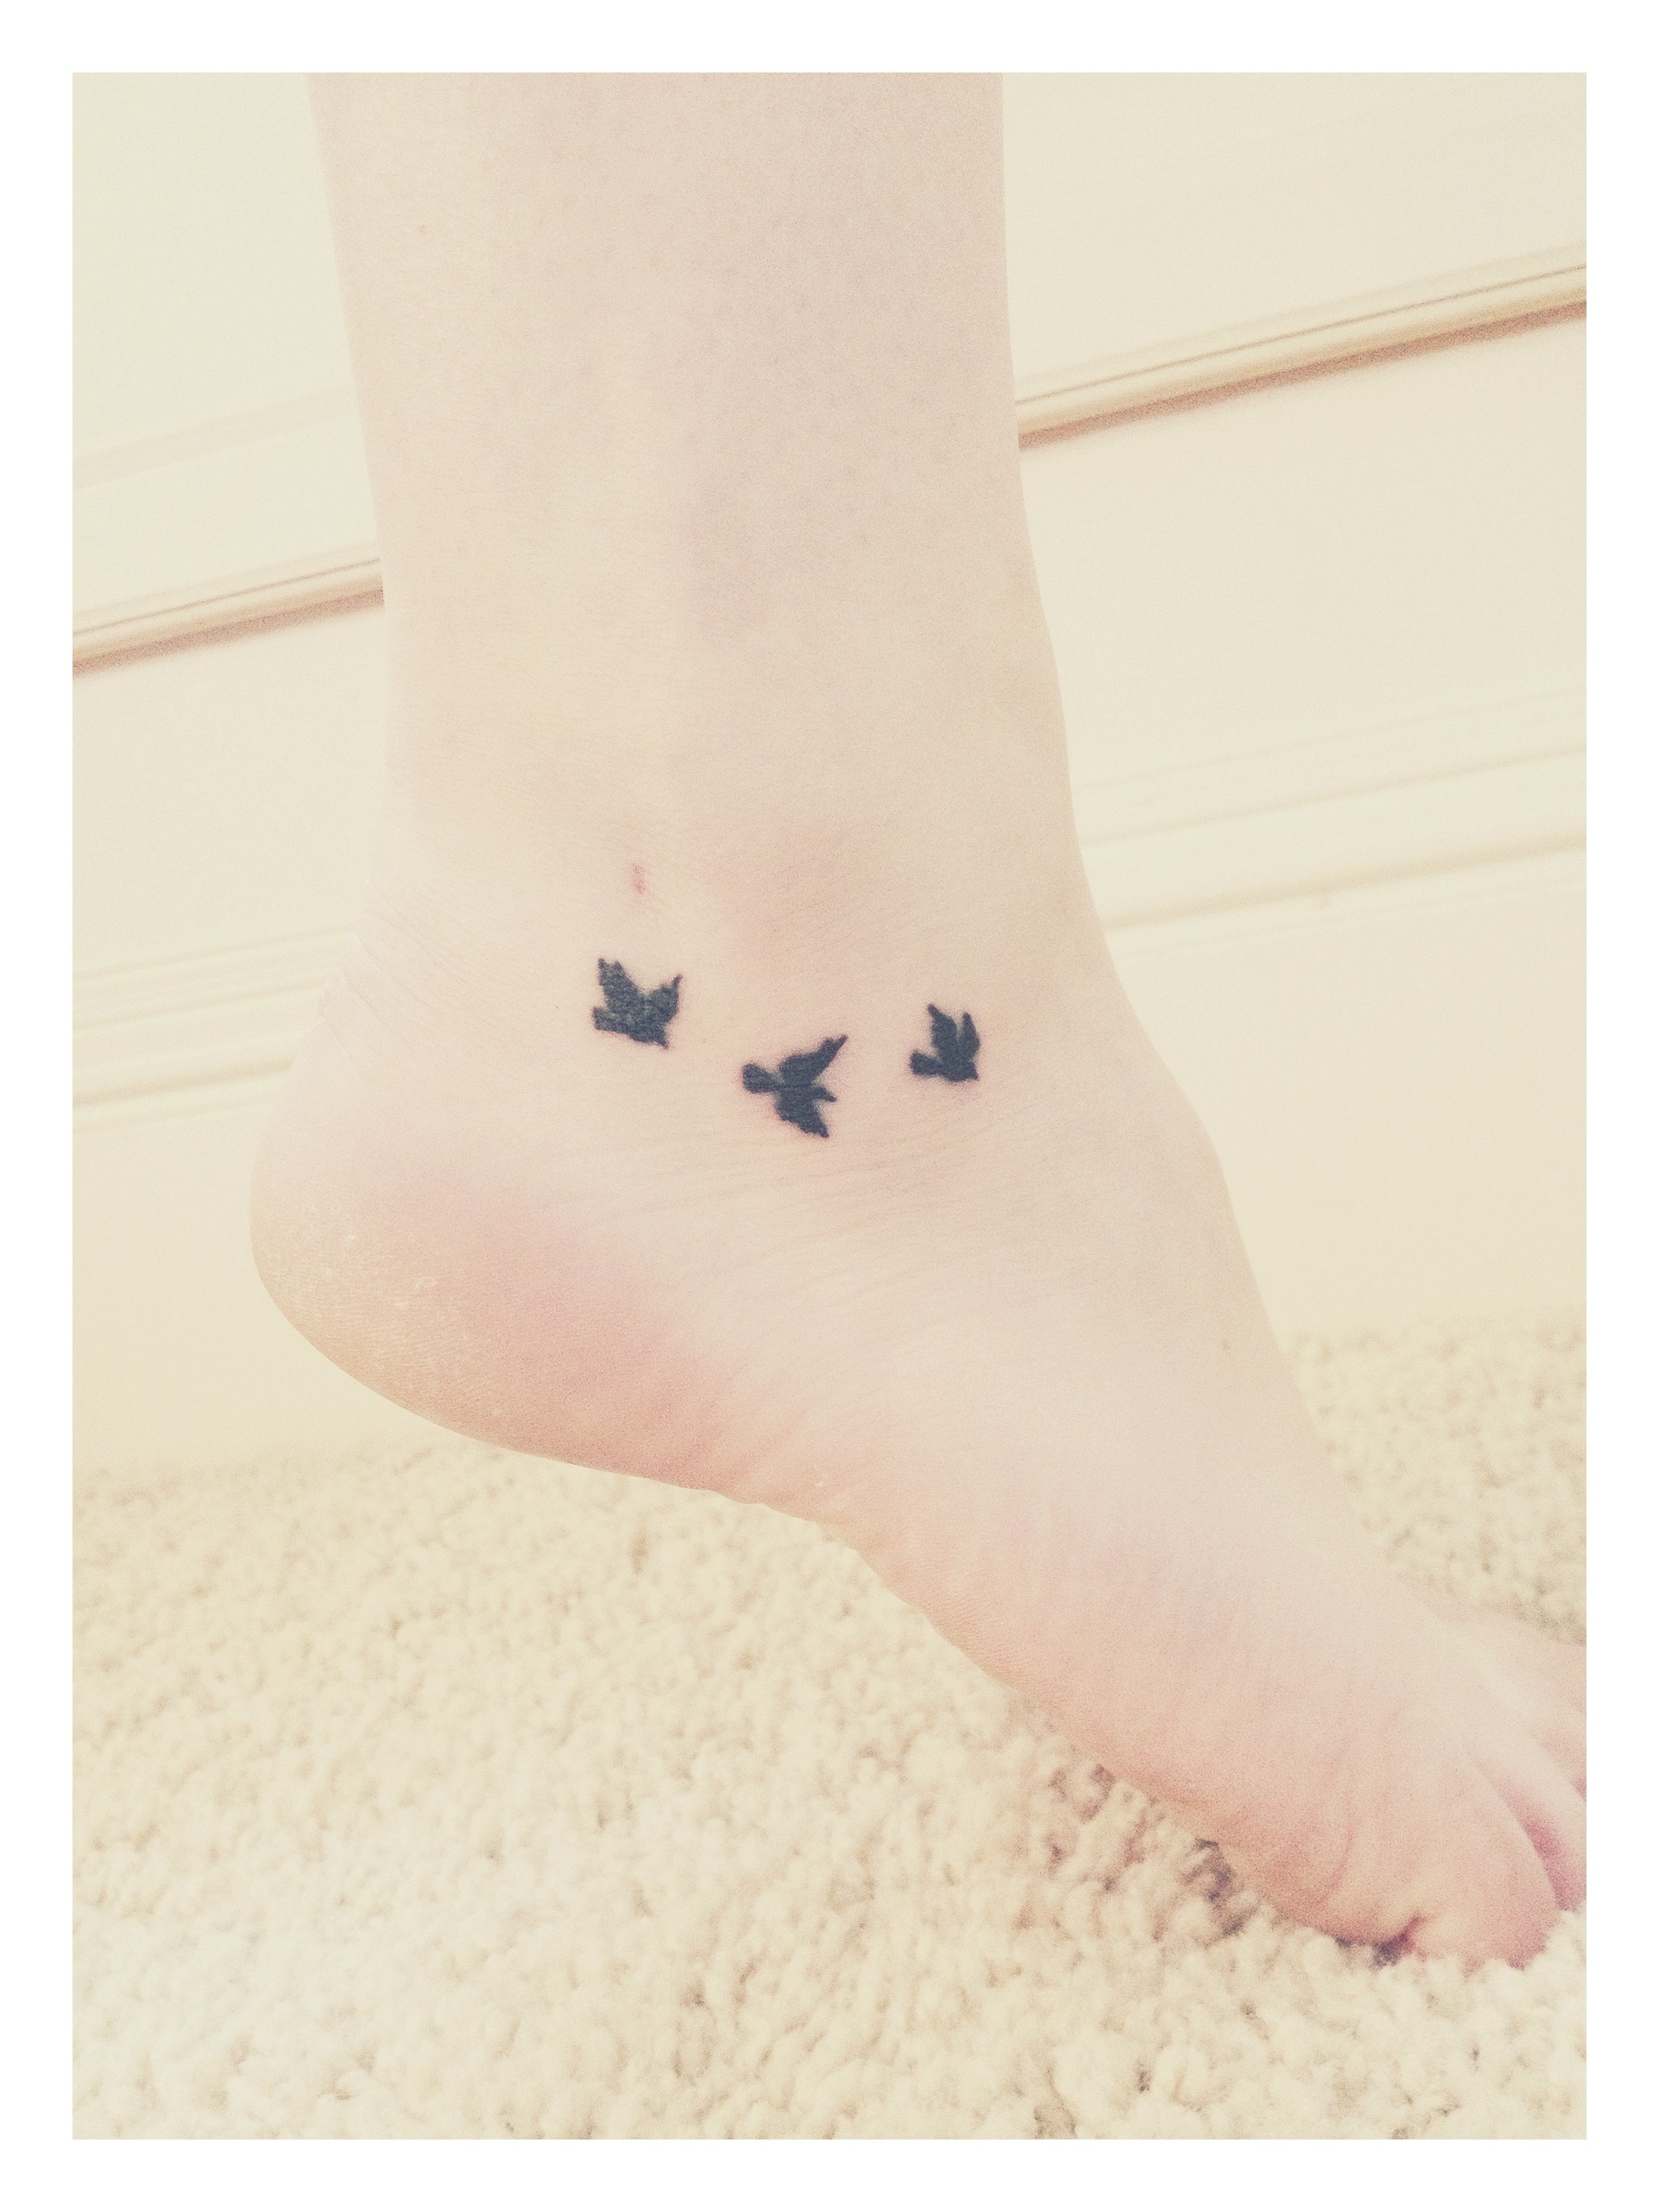 Bird Tattoo Below The Ankle For Matthew 6 Do Not Worry Atlas within dimensions 2448 X 3264